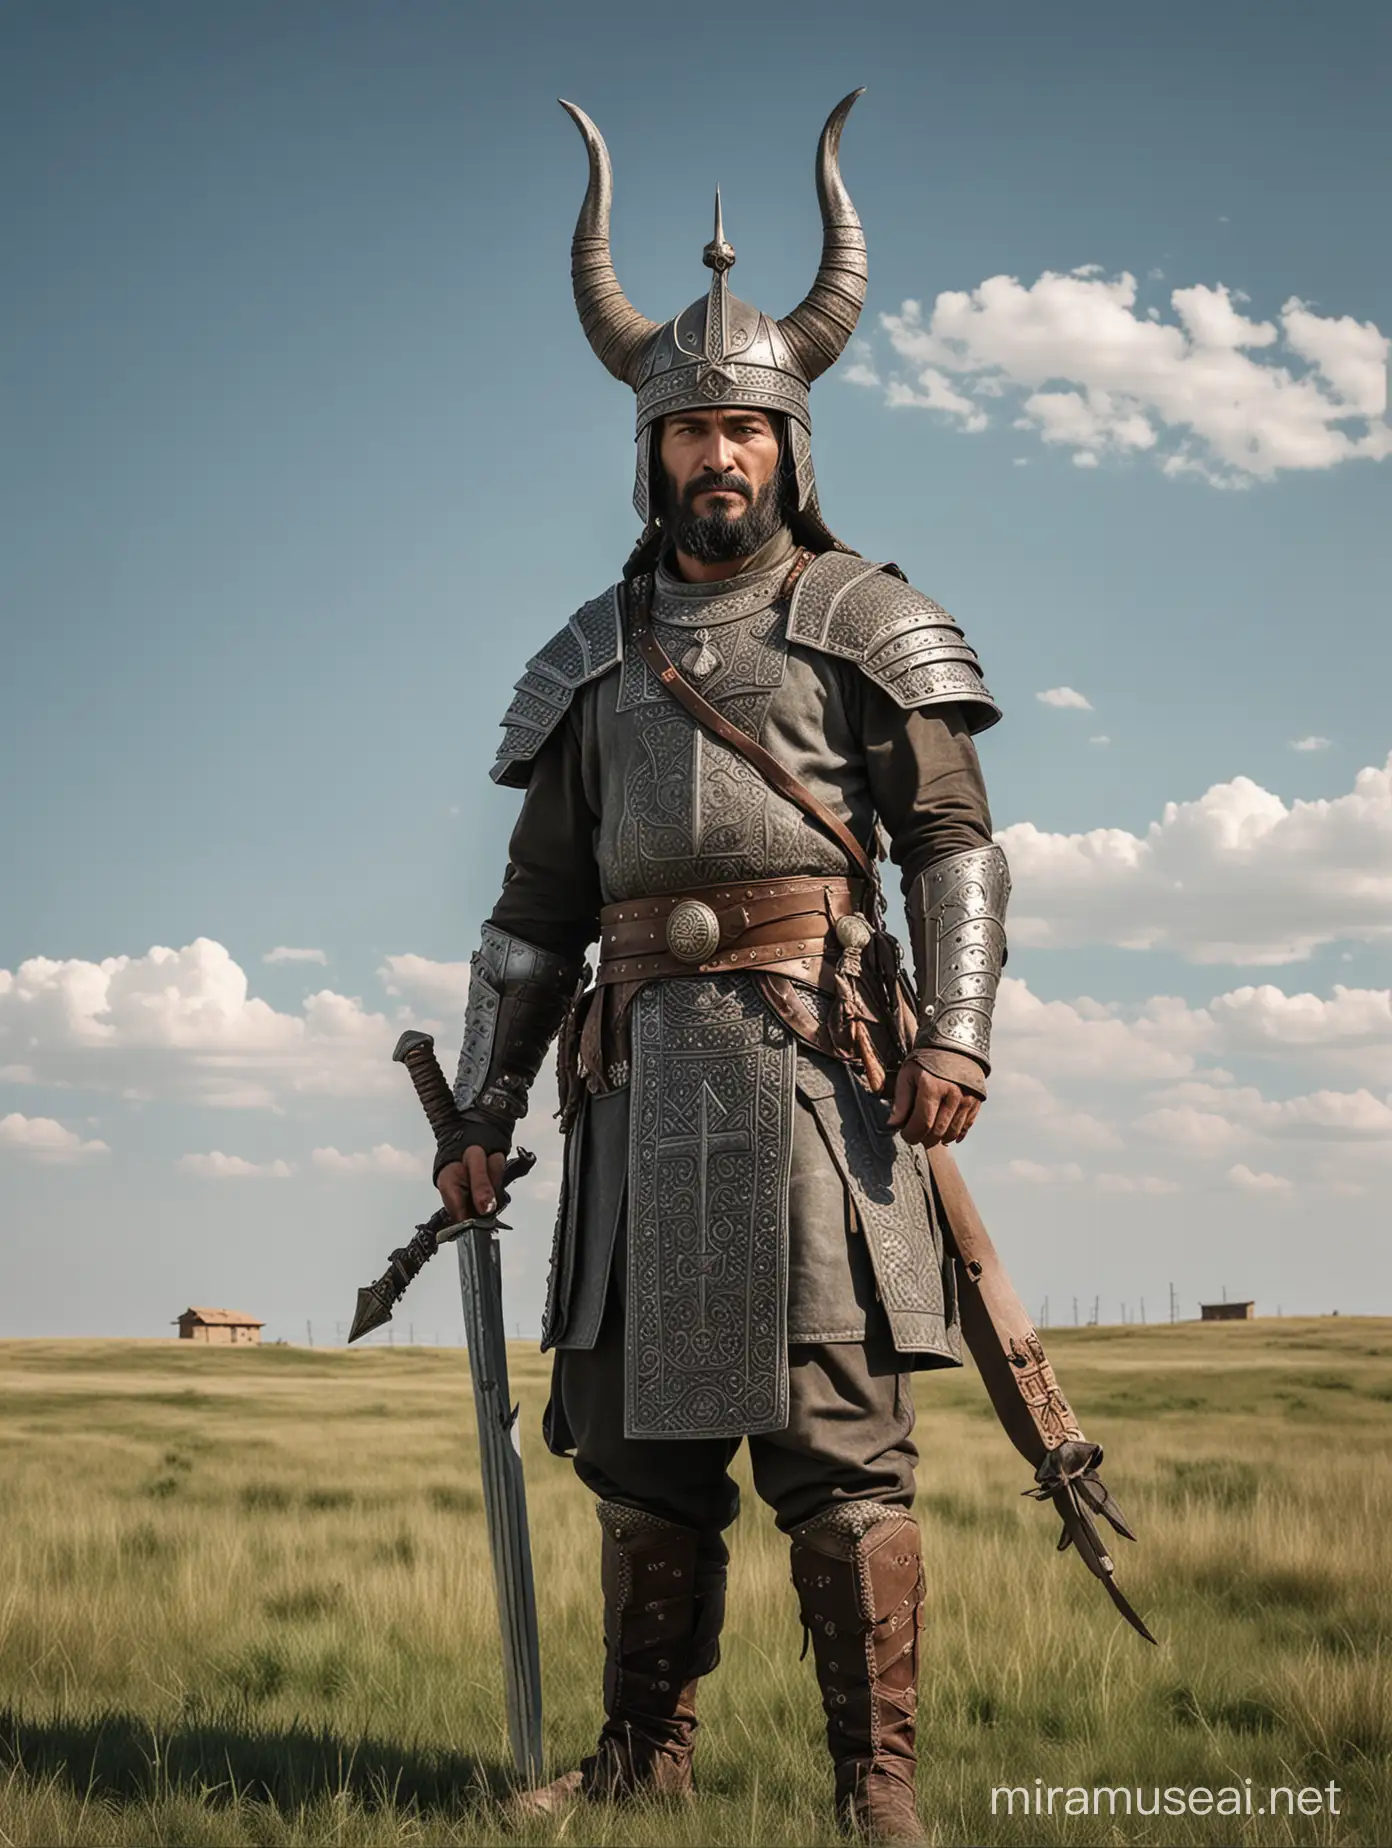 Ancient Turkic King with Horned Helmet and Sword on Grassland